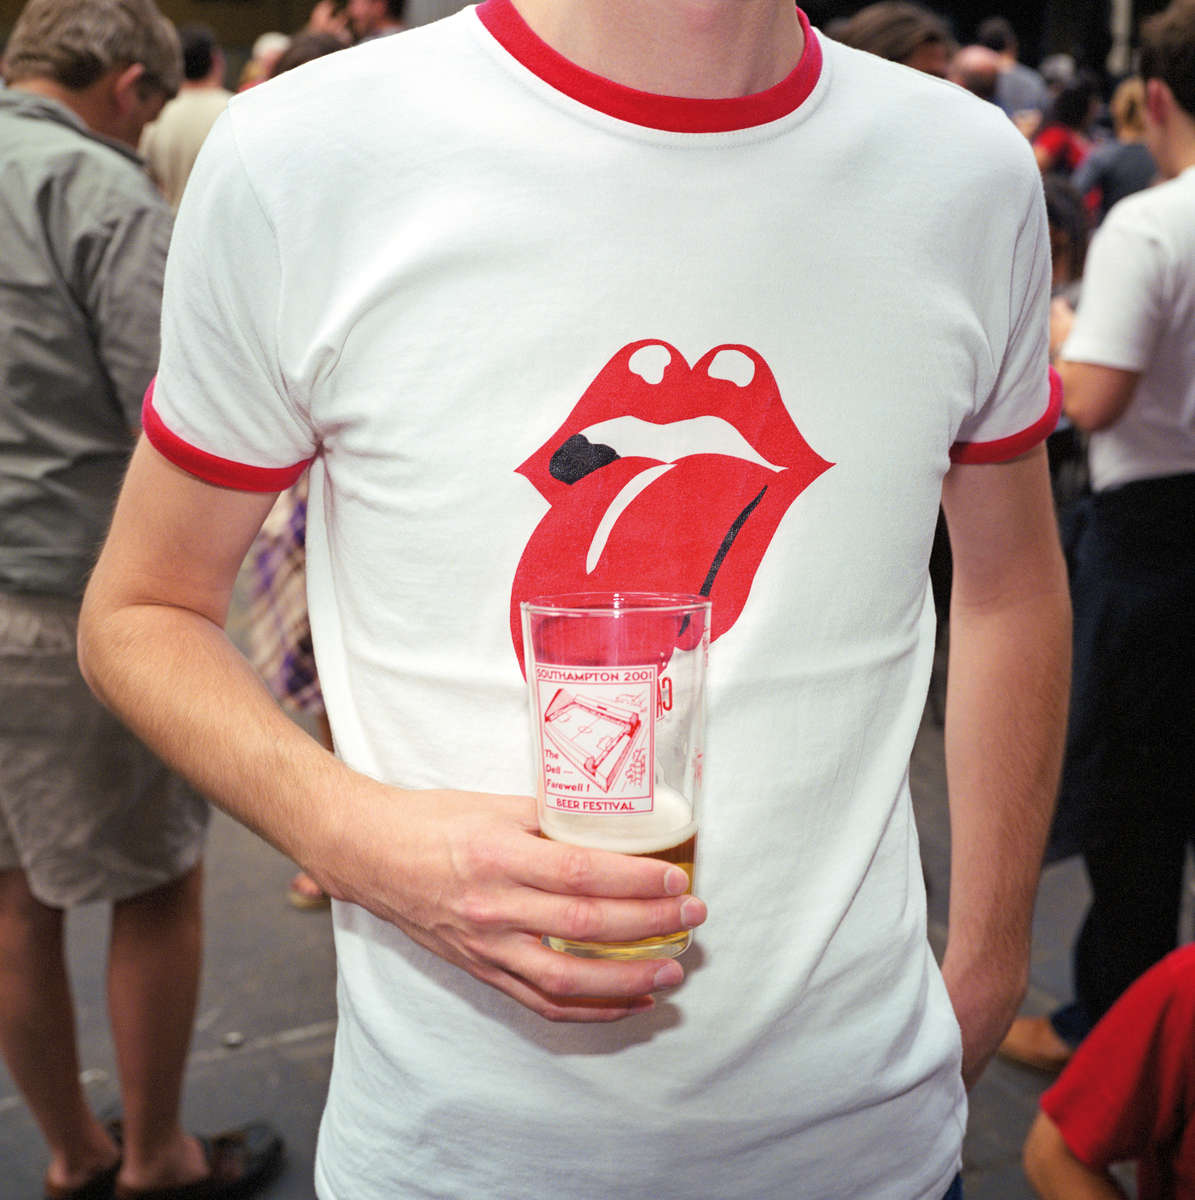 A visitor to the Great British Beer Festival at London’s Olympia. August 2001